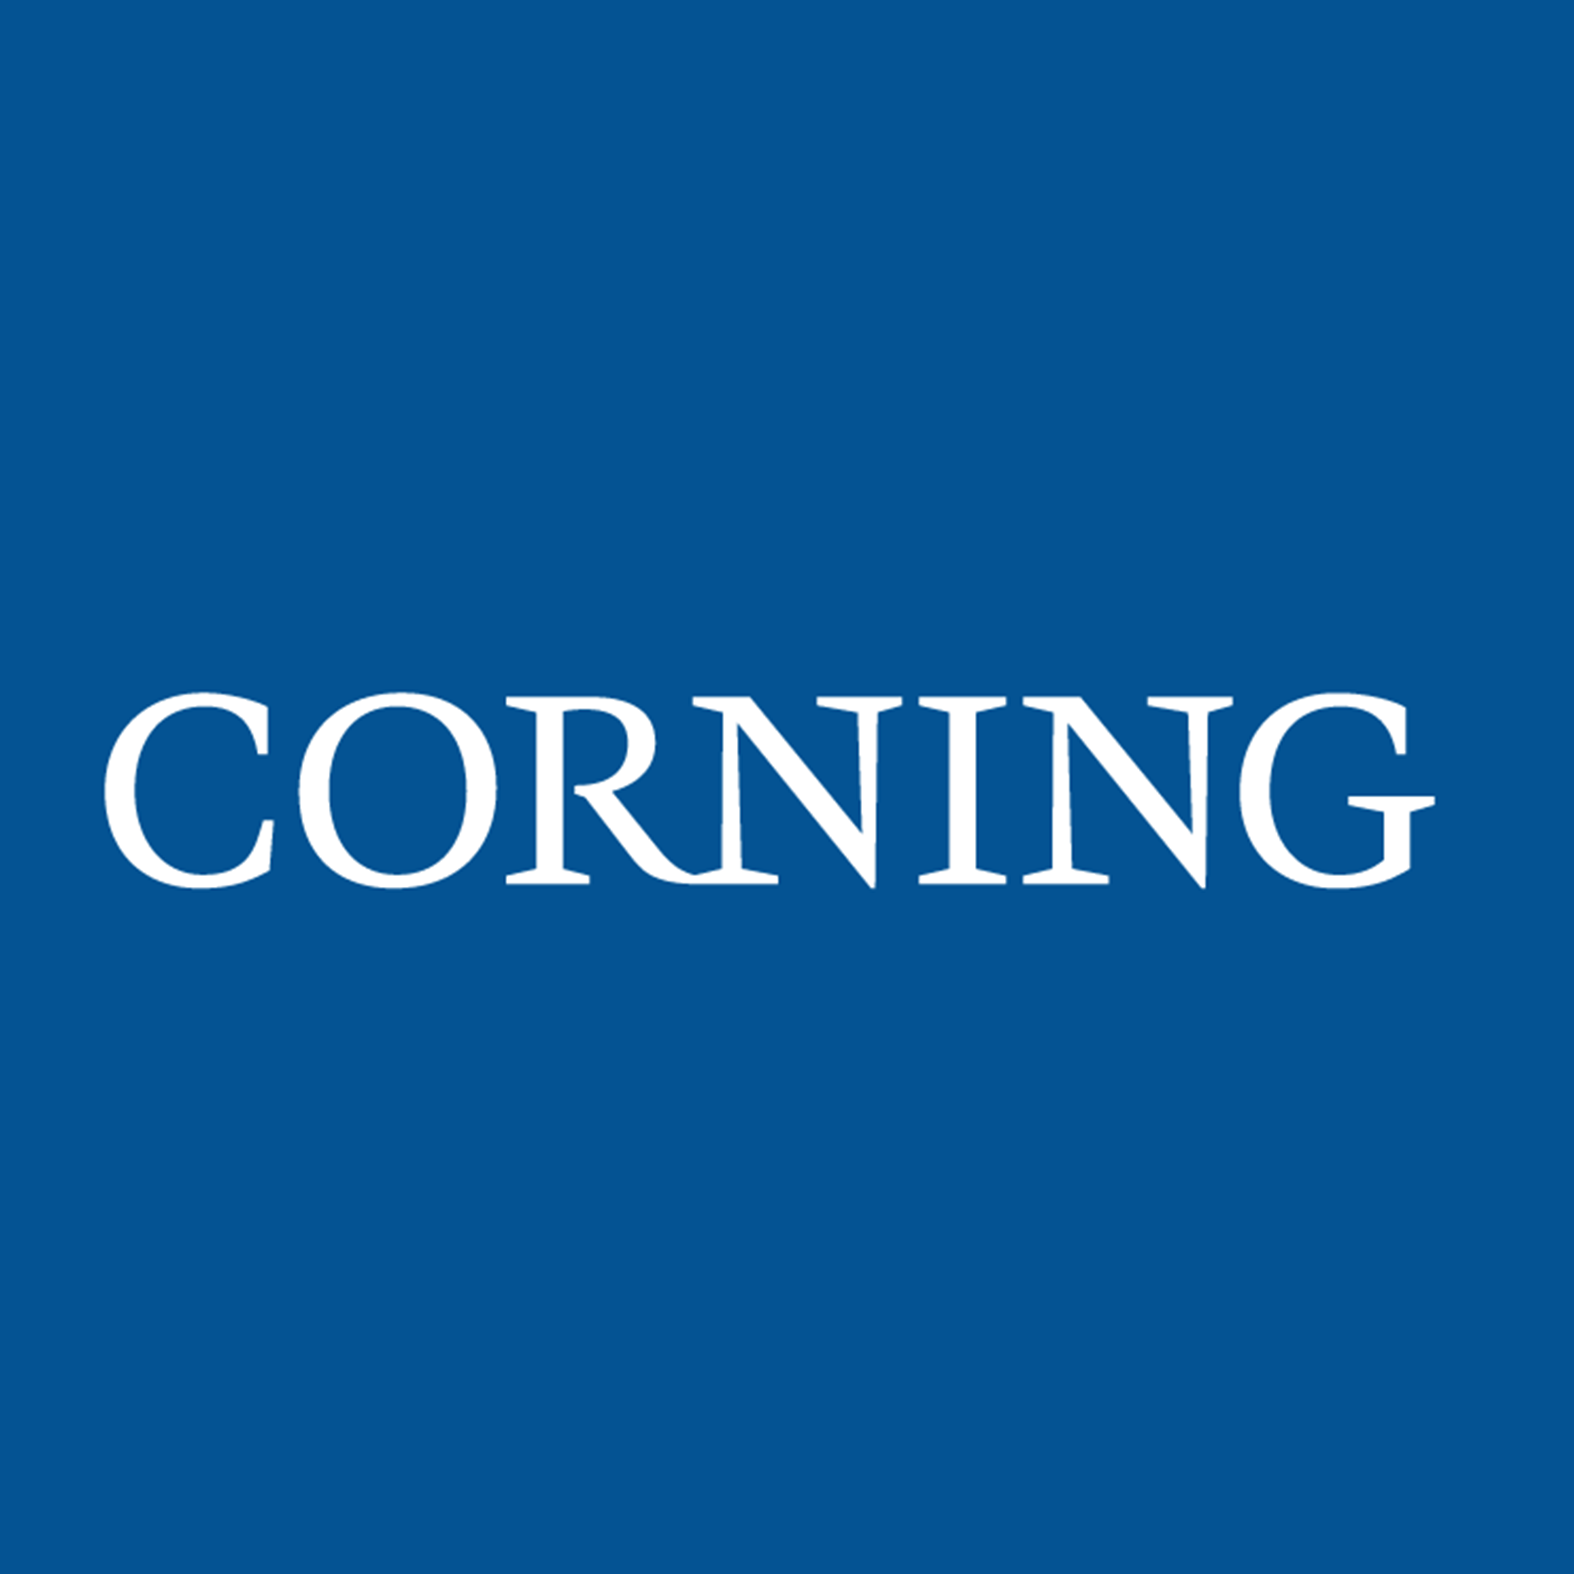 Corning® Stock Polysucrose Solution (Euro-Collins) density 1.132 g/cm³, Islet Solutions and Reagents